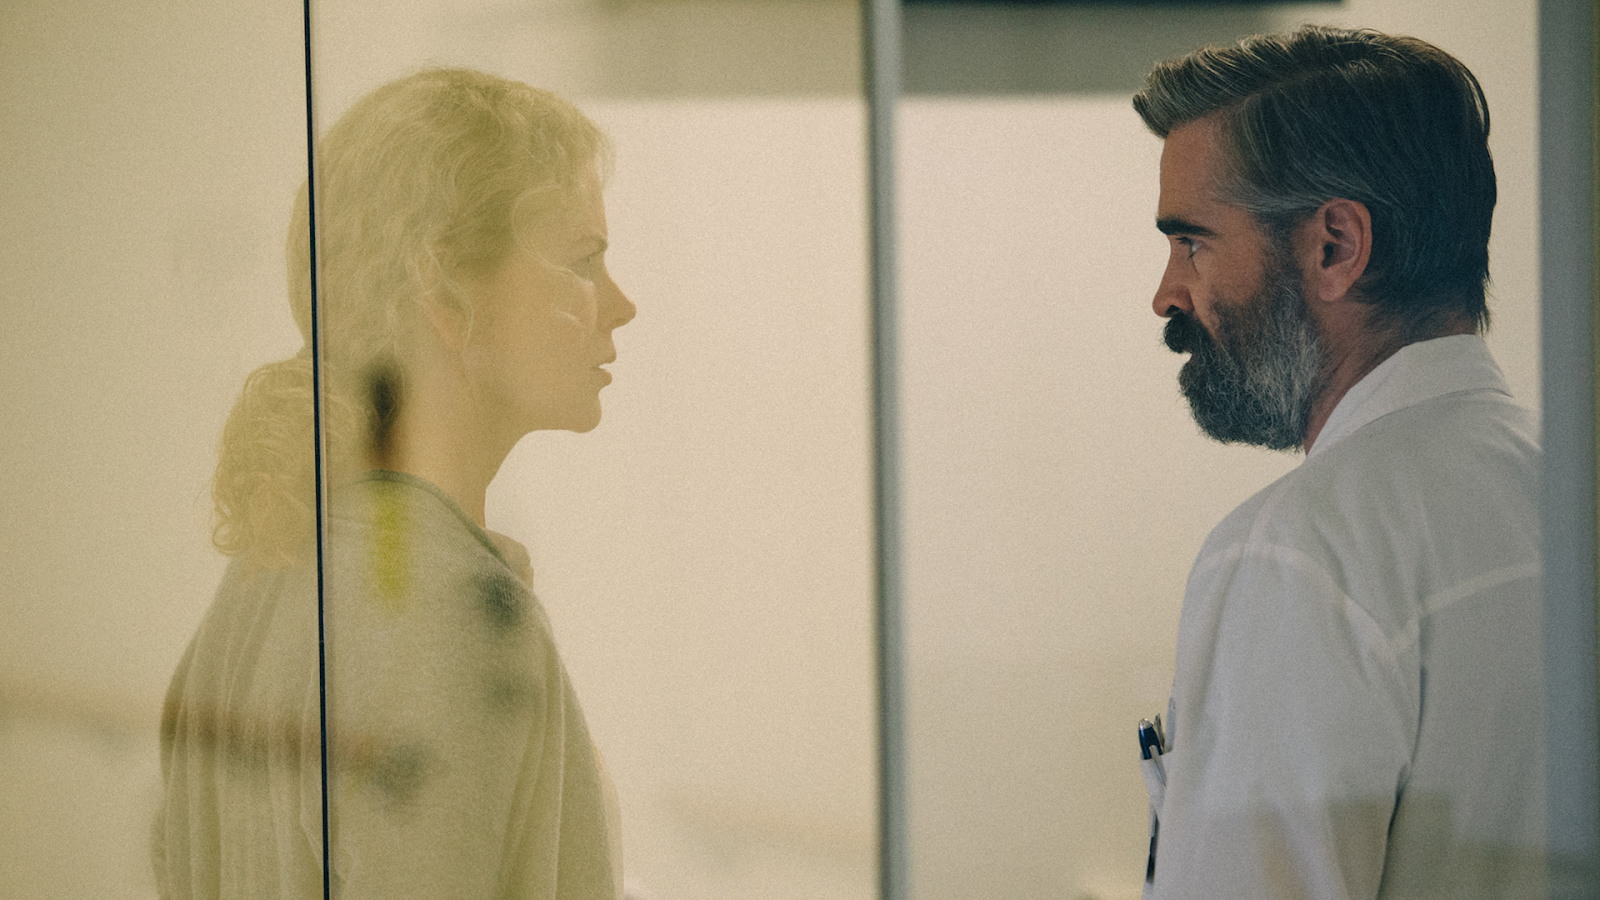 A middle-aged man wearing a white coat looks at a woman around the same age. A pane of glass separates them.